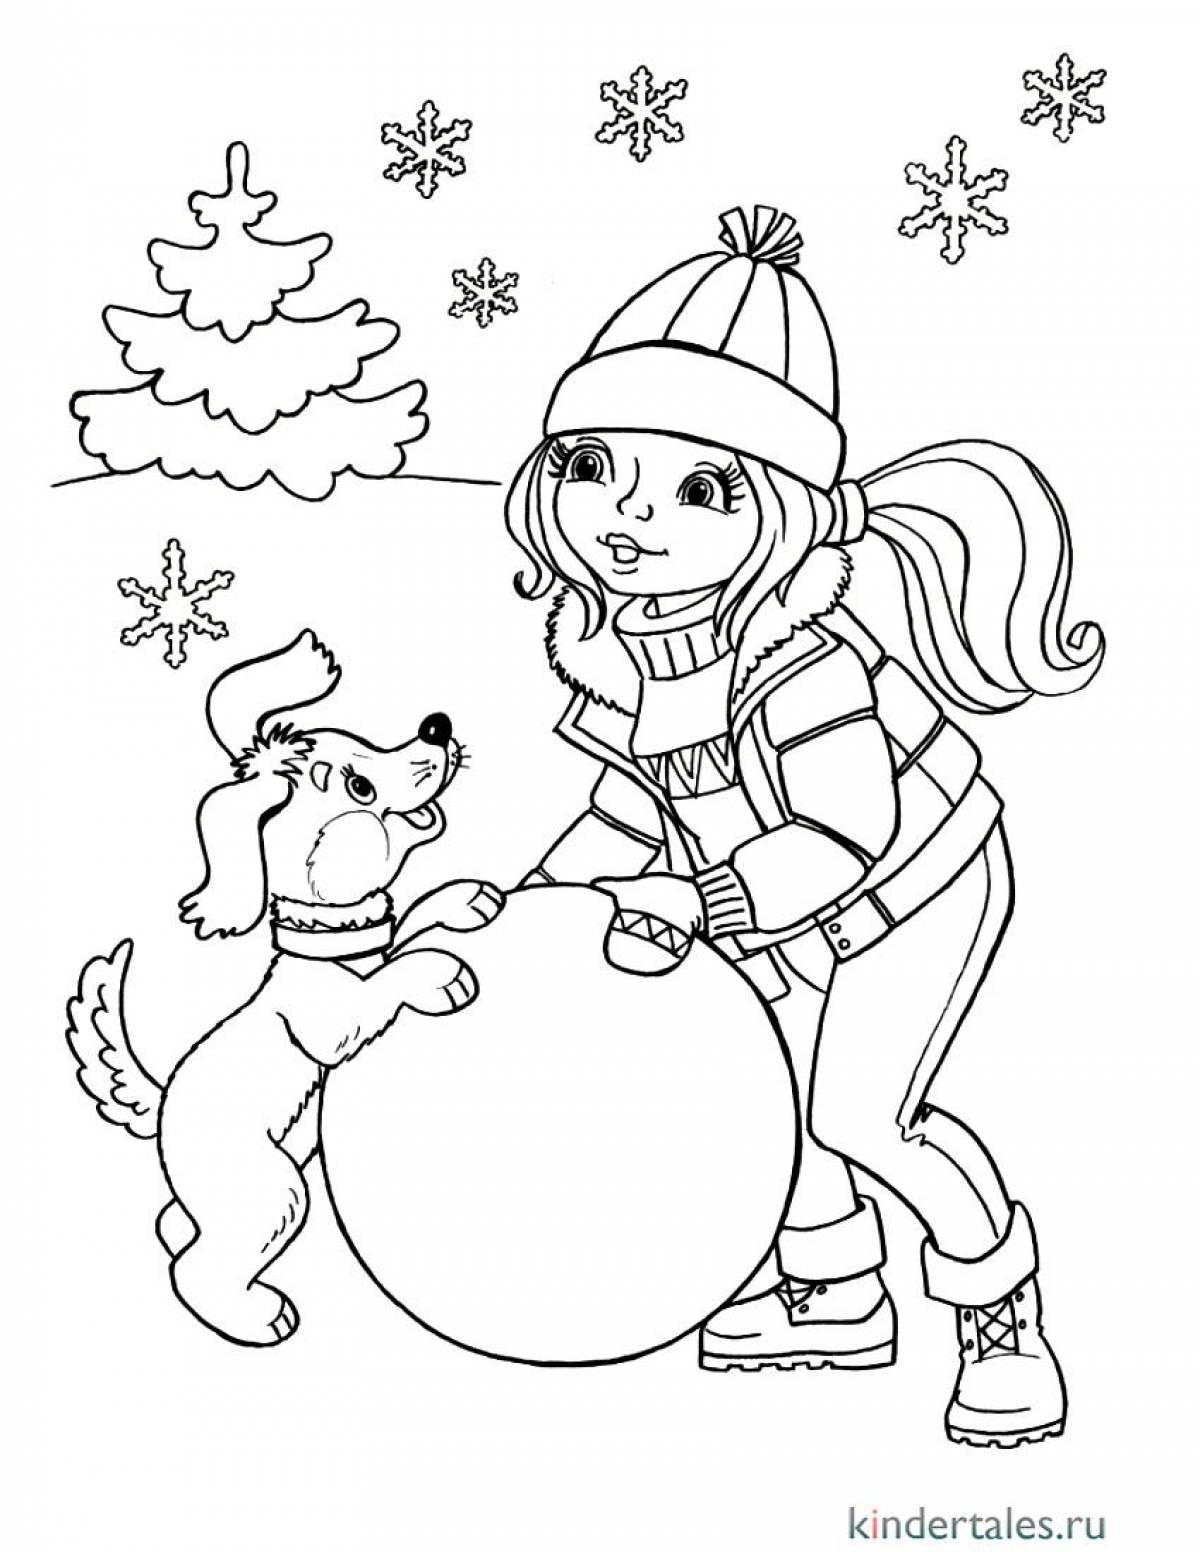 Holiday coloring book winter for children 10 years old